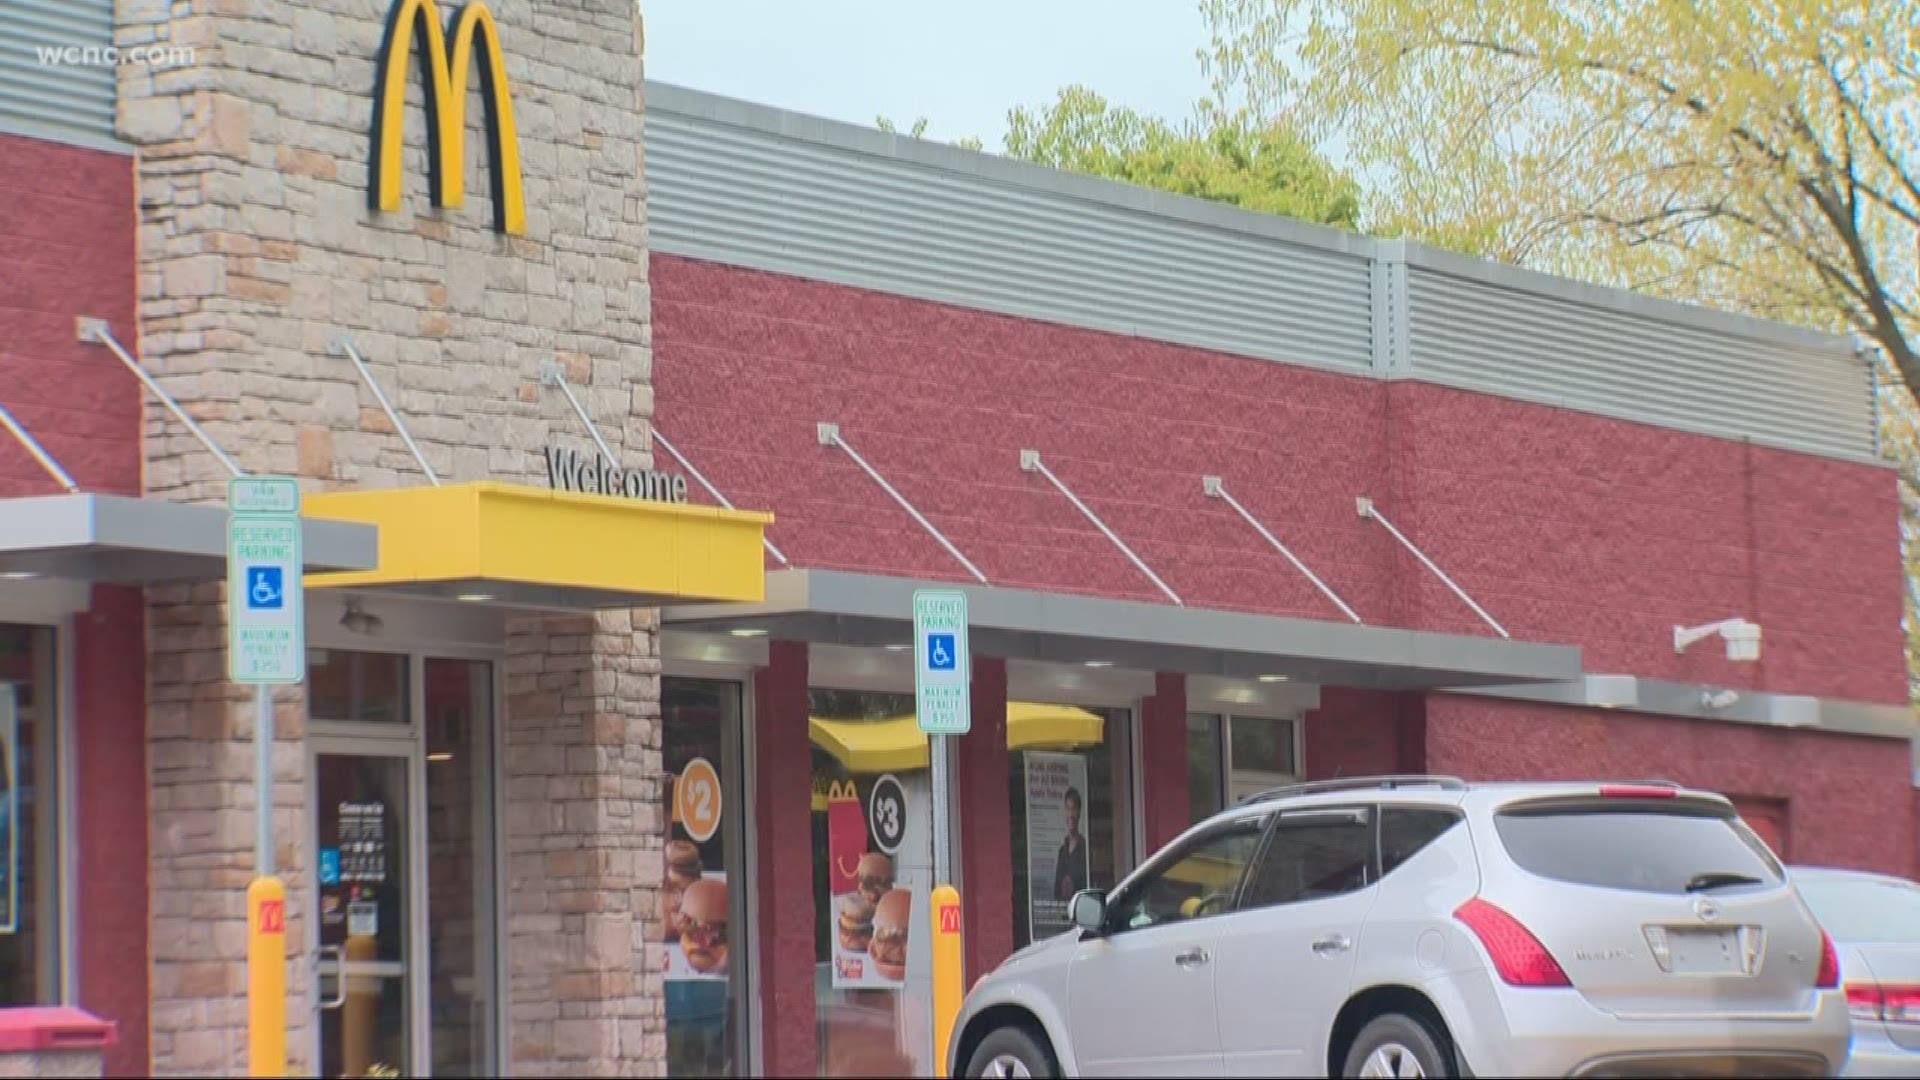 The man got angry when he couldn't get a free bottled water, according to management. That's when they say the man jumped through the drive-thru window and assaulted a worker. Police say the suspect punched the victim in the head, then damaged a glass cookie display case.